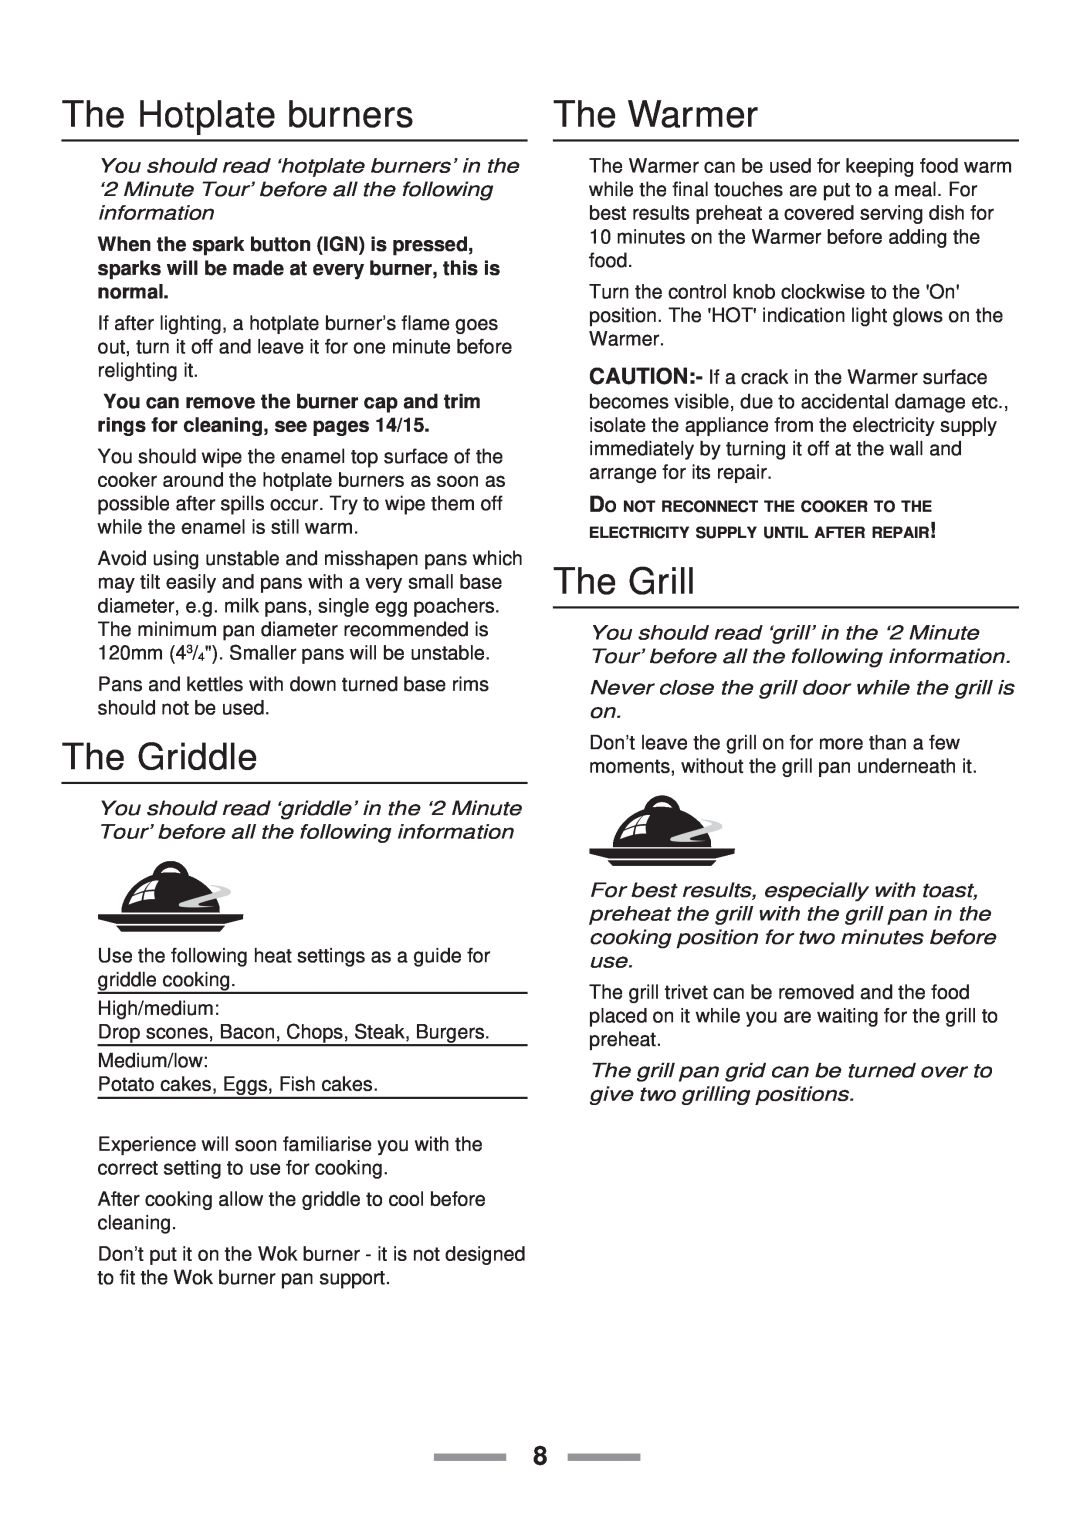 Rangemaster 110 installation instructions The Hotplate burners, The Warmer, The Griddle, The Grill 